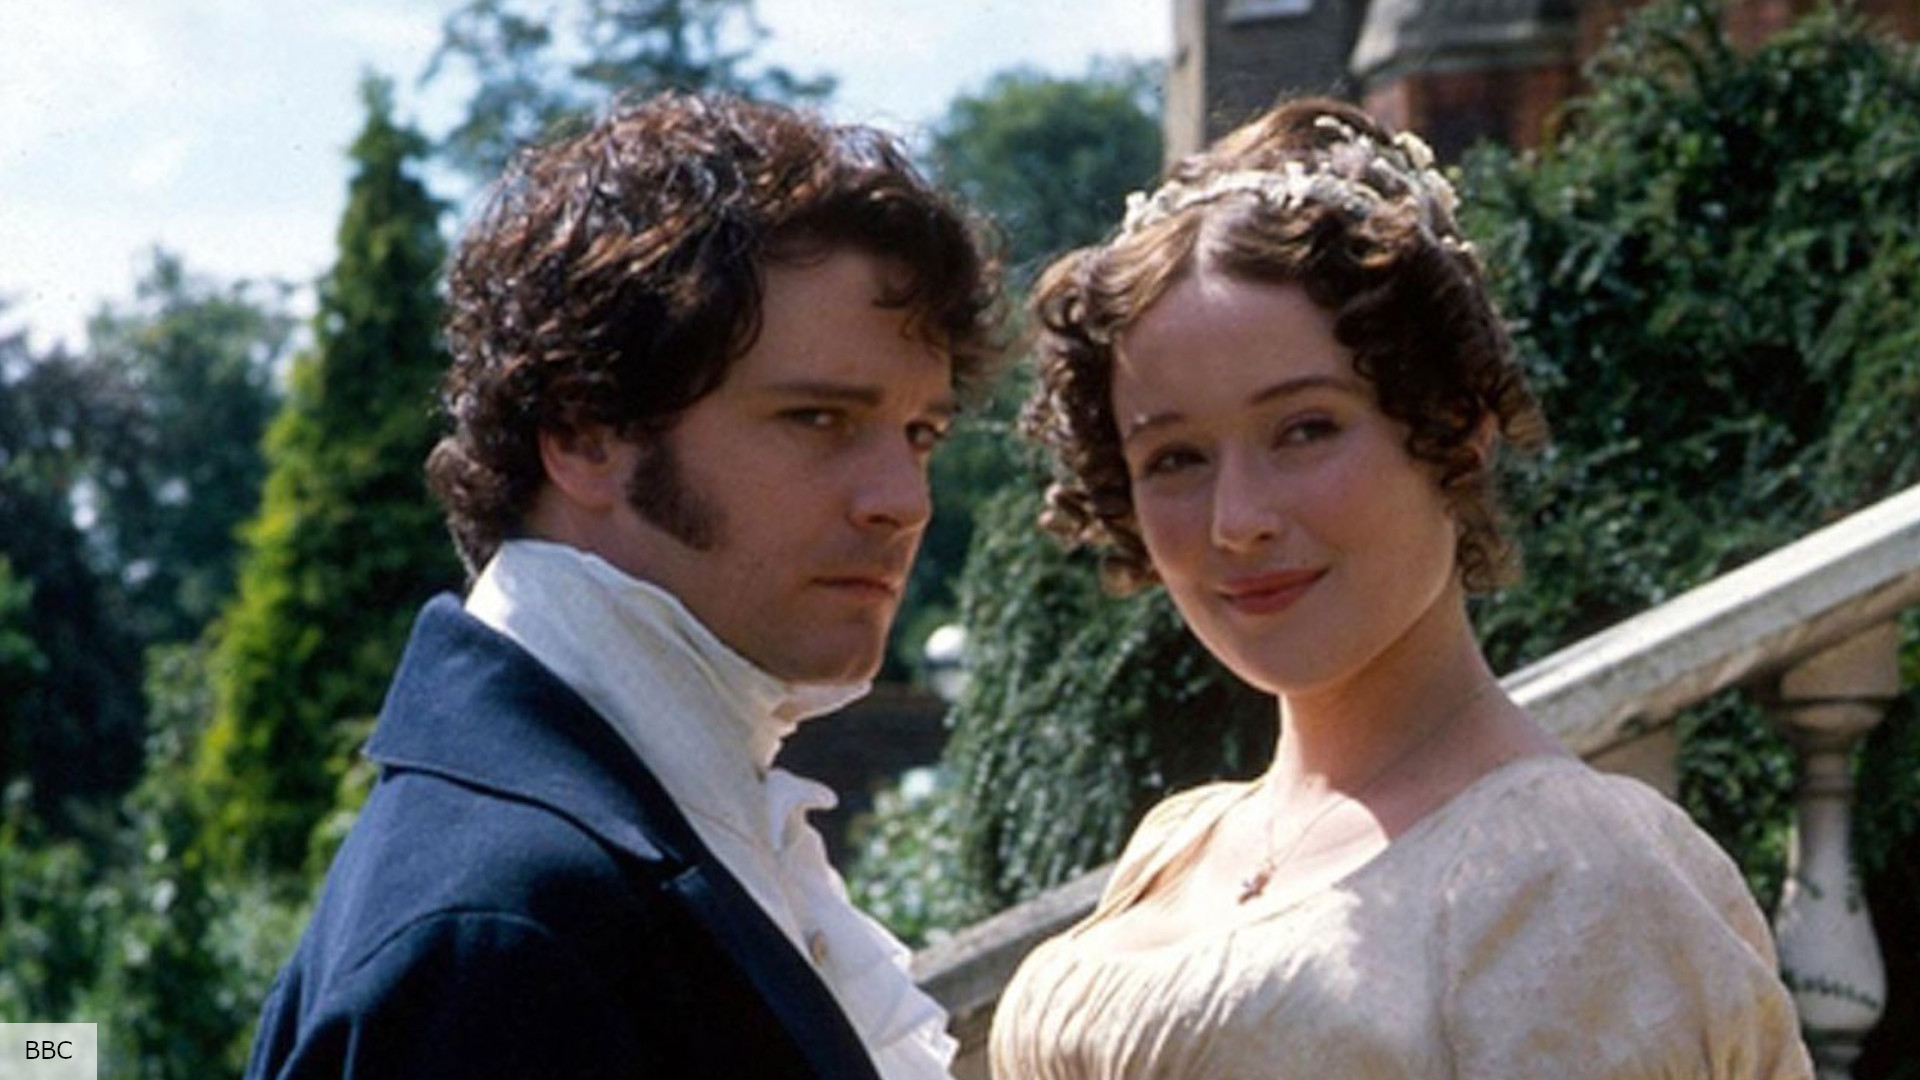 Why Colin Firth Is Still The Best Mr Darcy